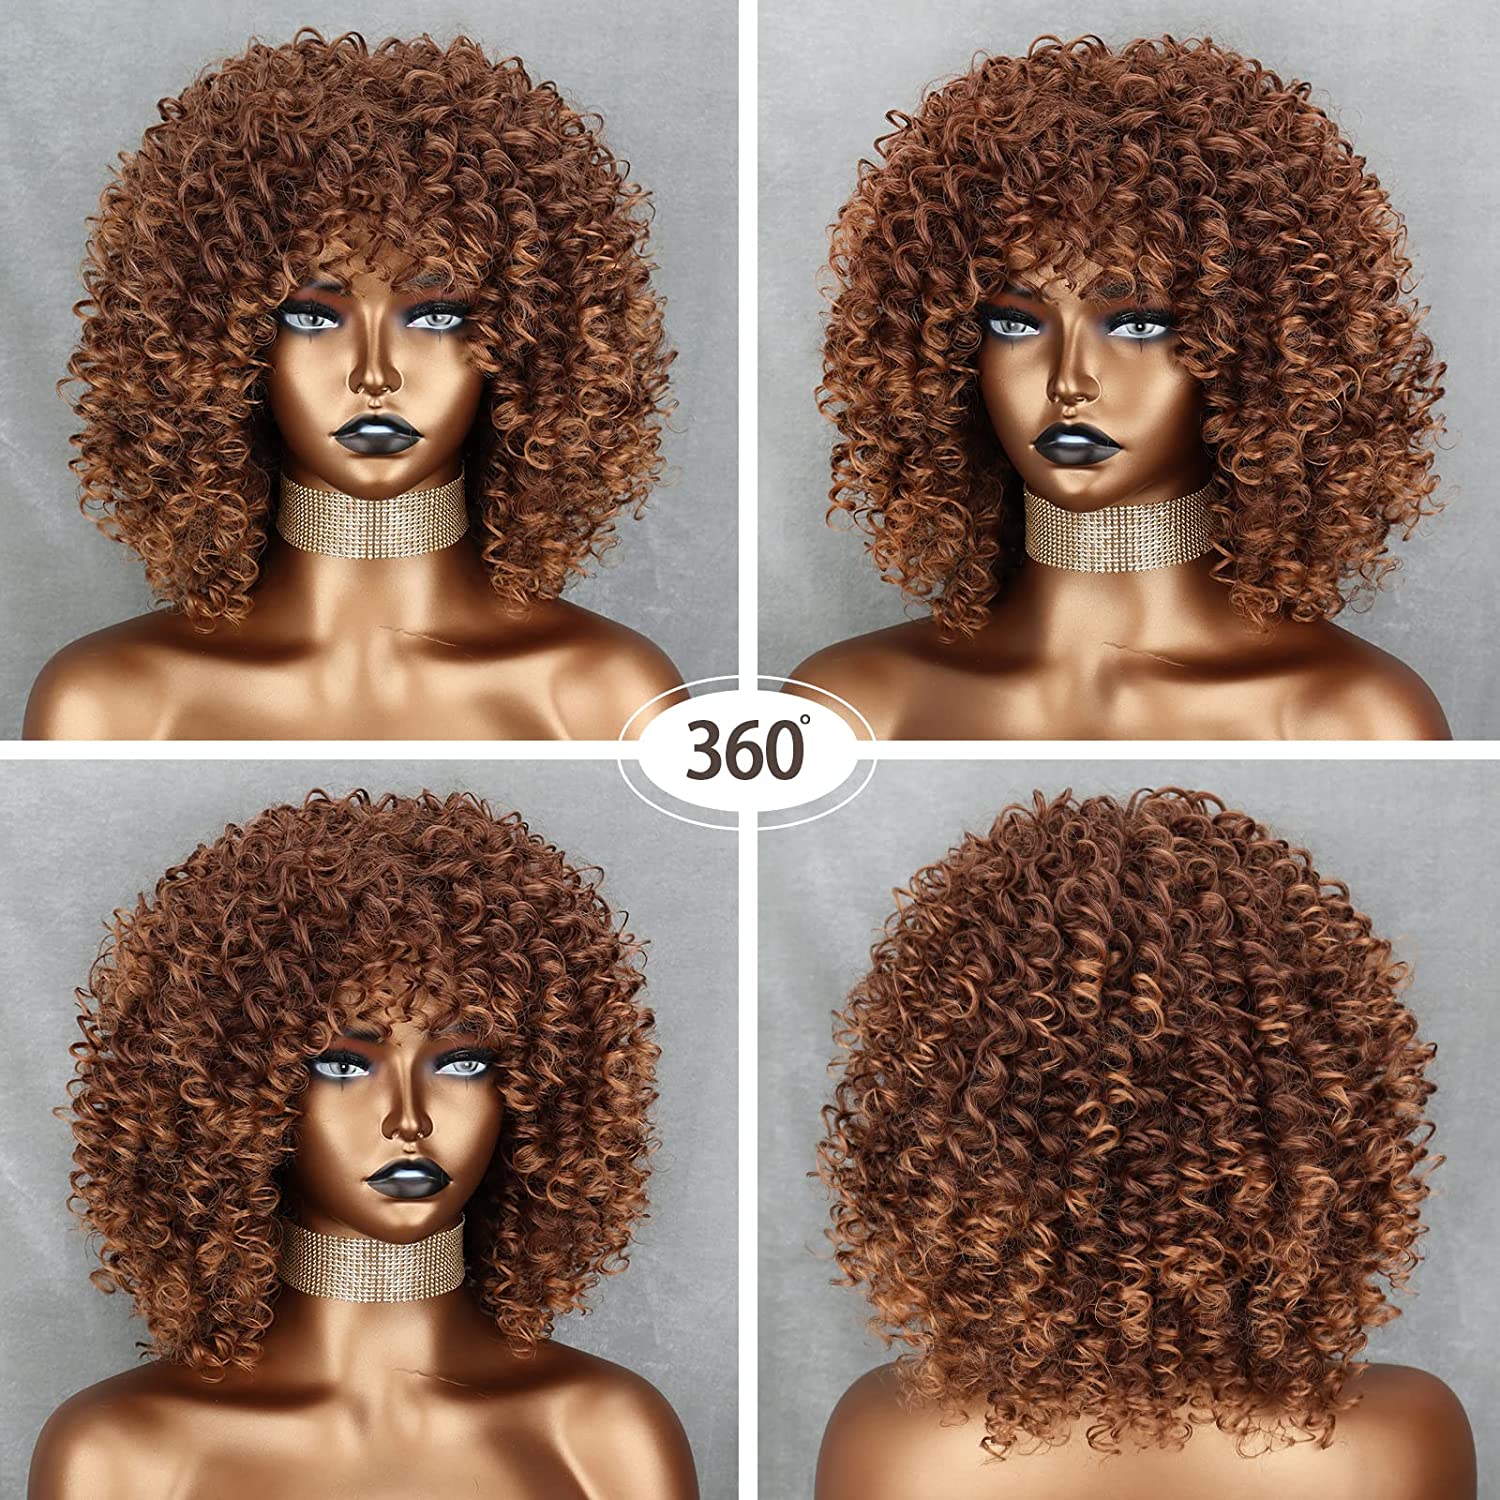 Brown Curly Afro Wig for Black Women,Short Kinky Curly Wig with Bangs,Synthetic Afro Full Hair Wig 14inch(Light Brown)